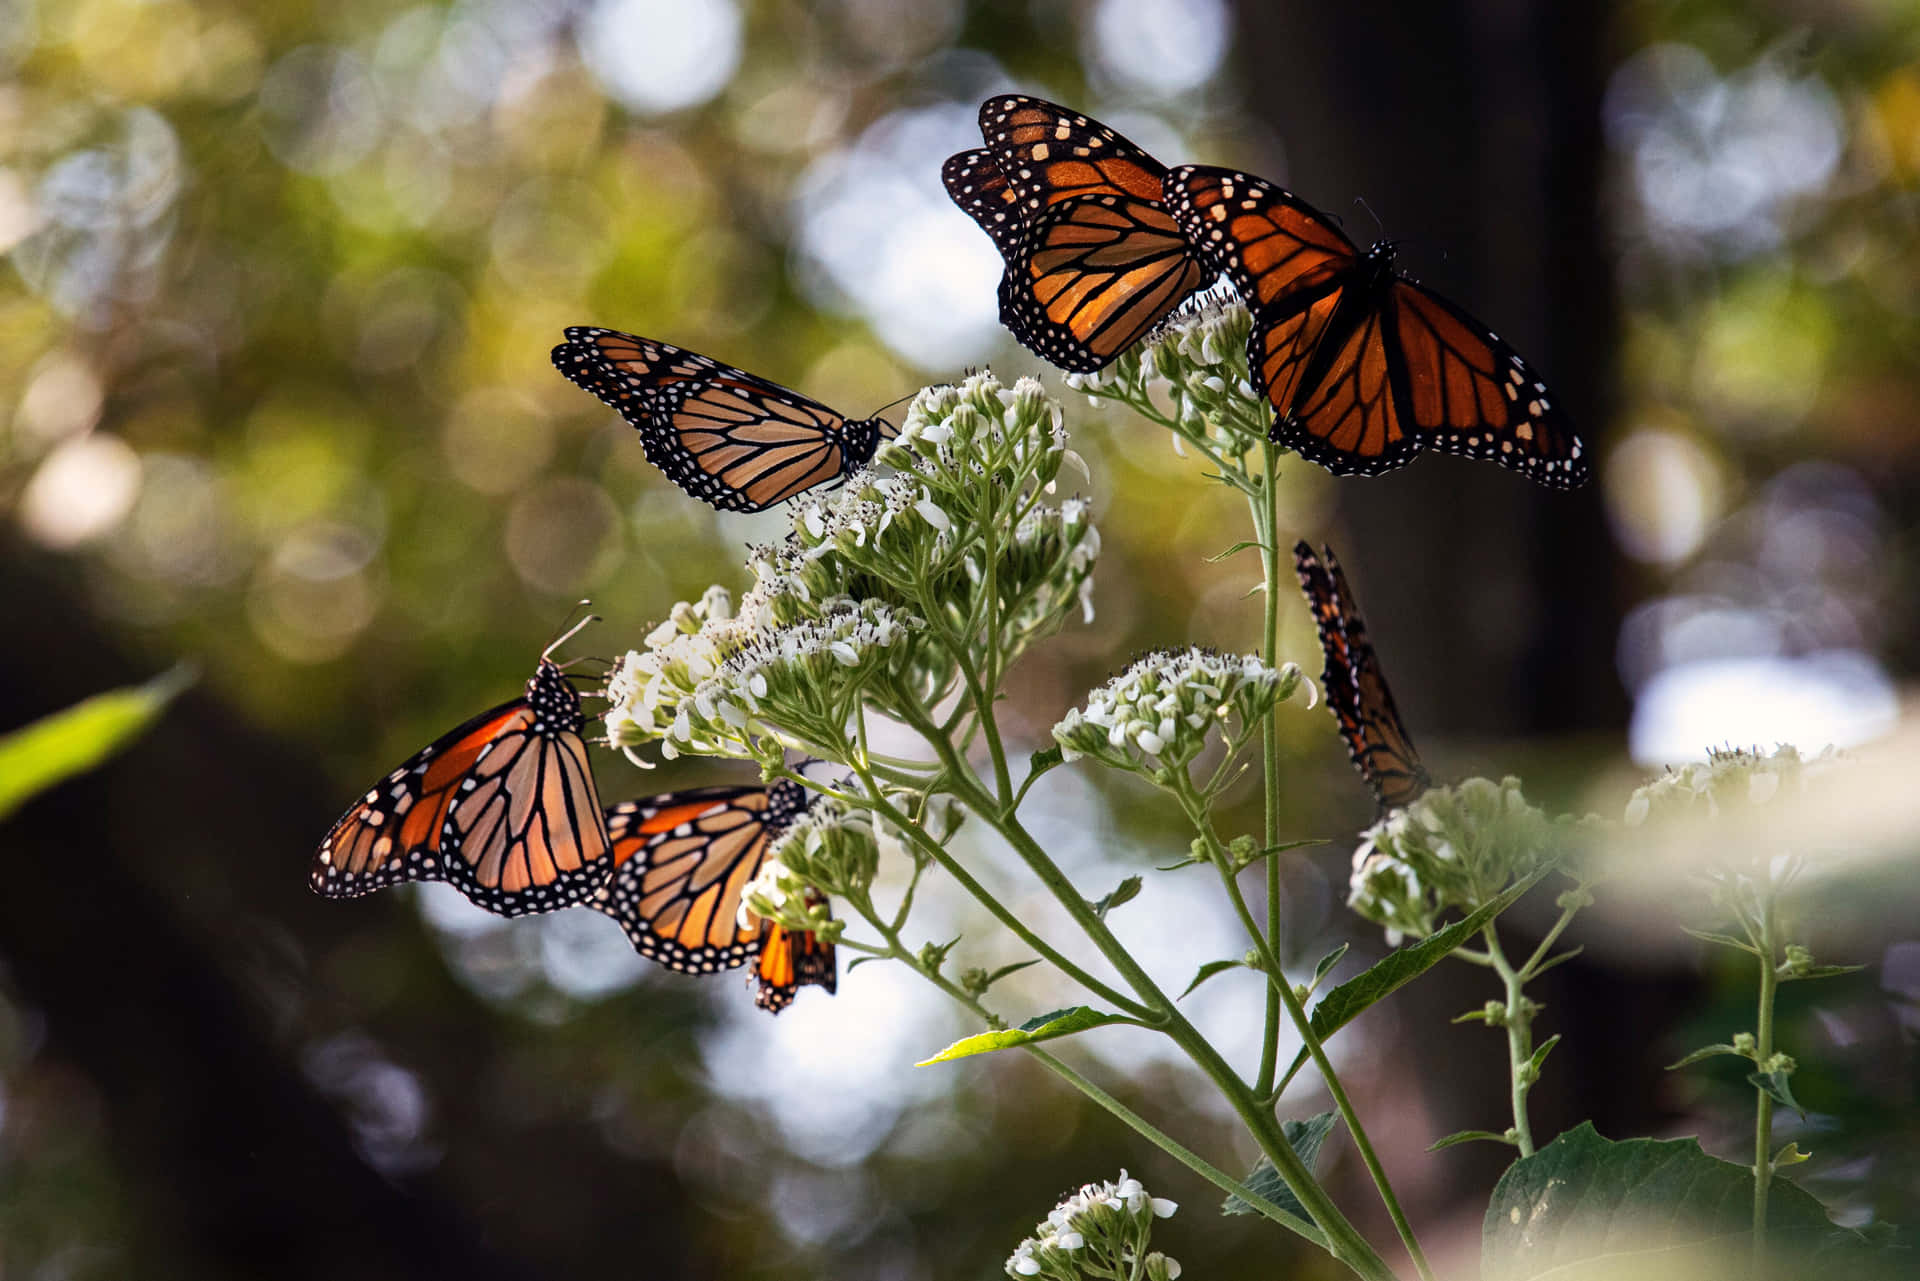 Millions of butterflies embark on an epic annual migration every year. Wallpaper